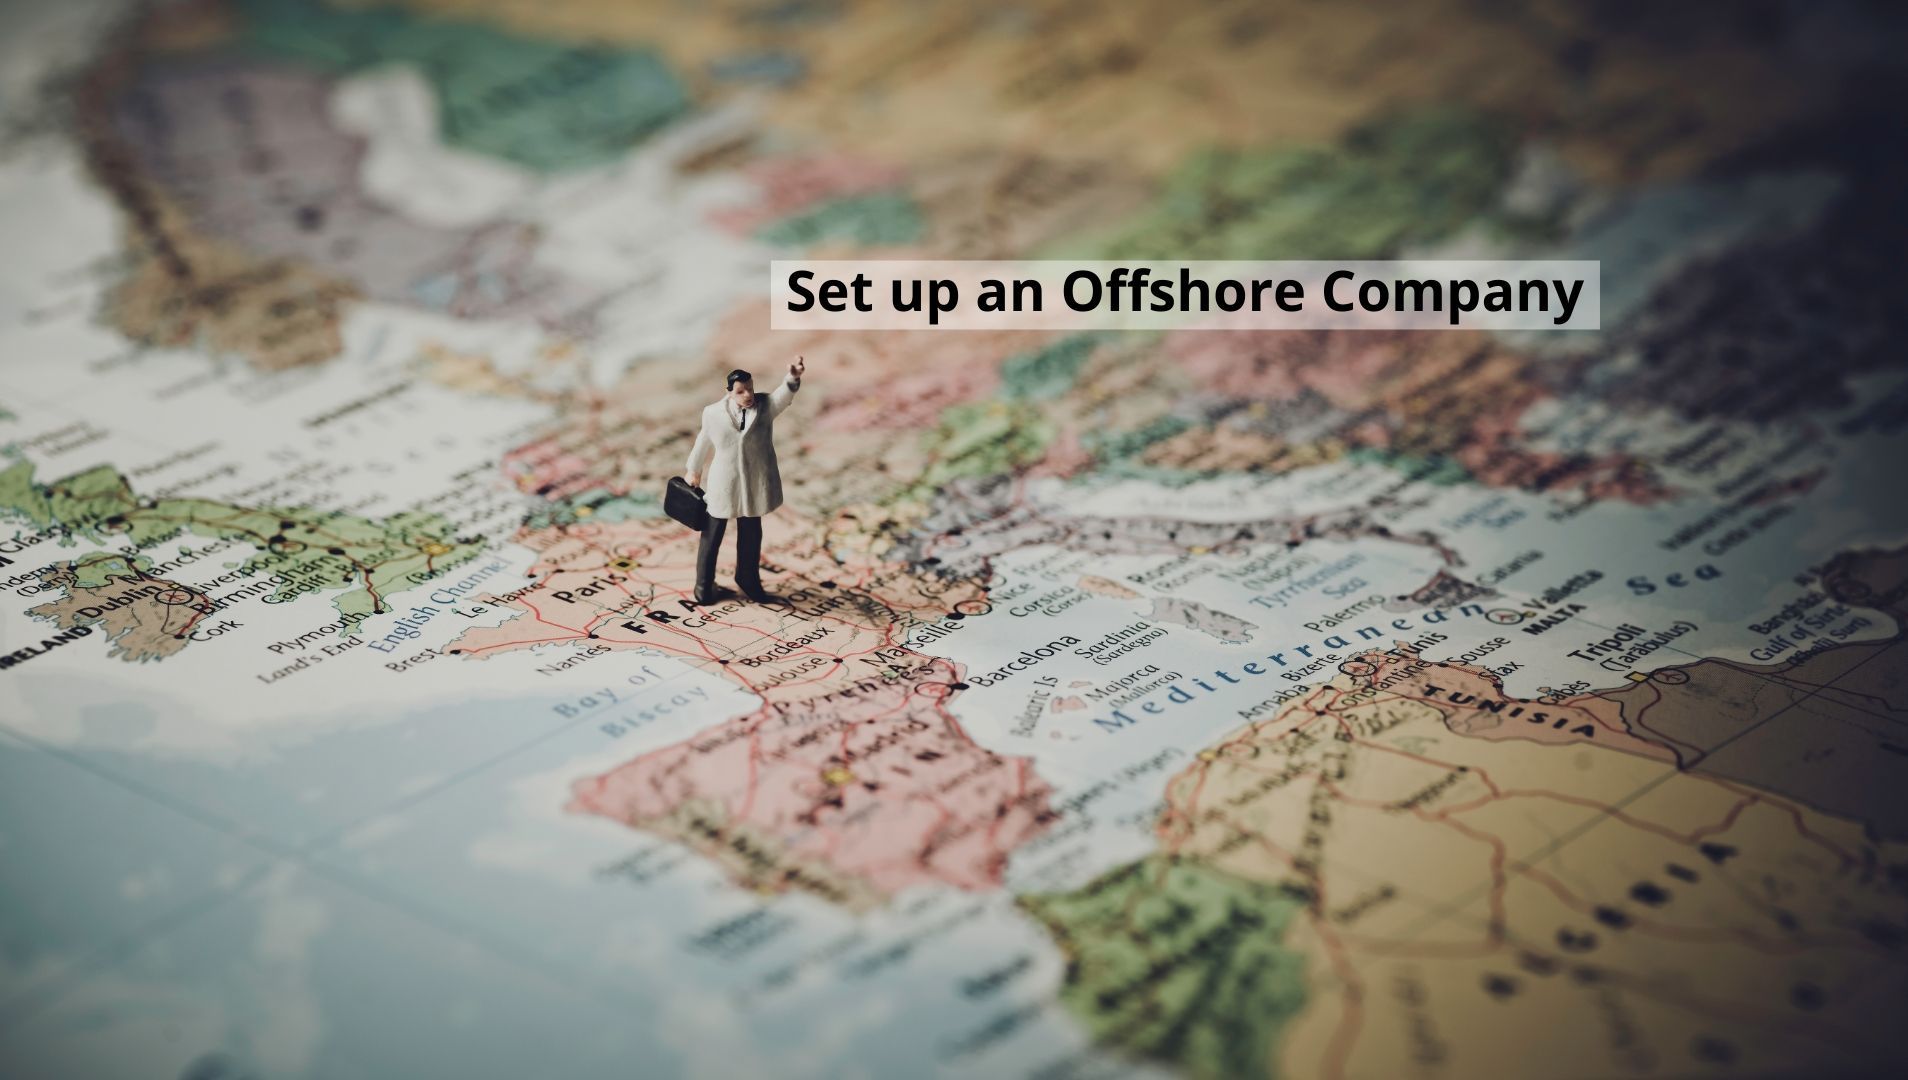 Maximizing your Profits by Creating an Offshore Company in the UAE